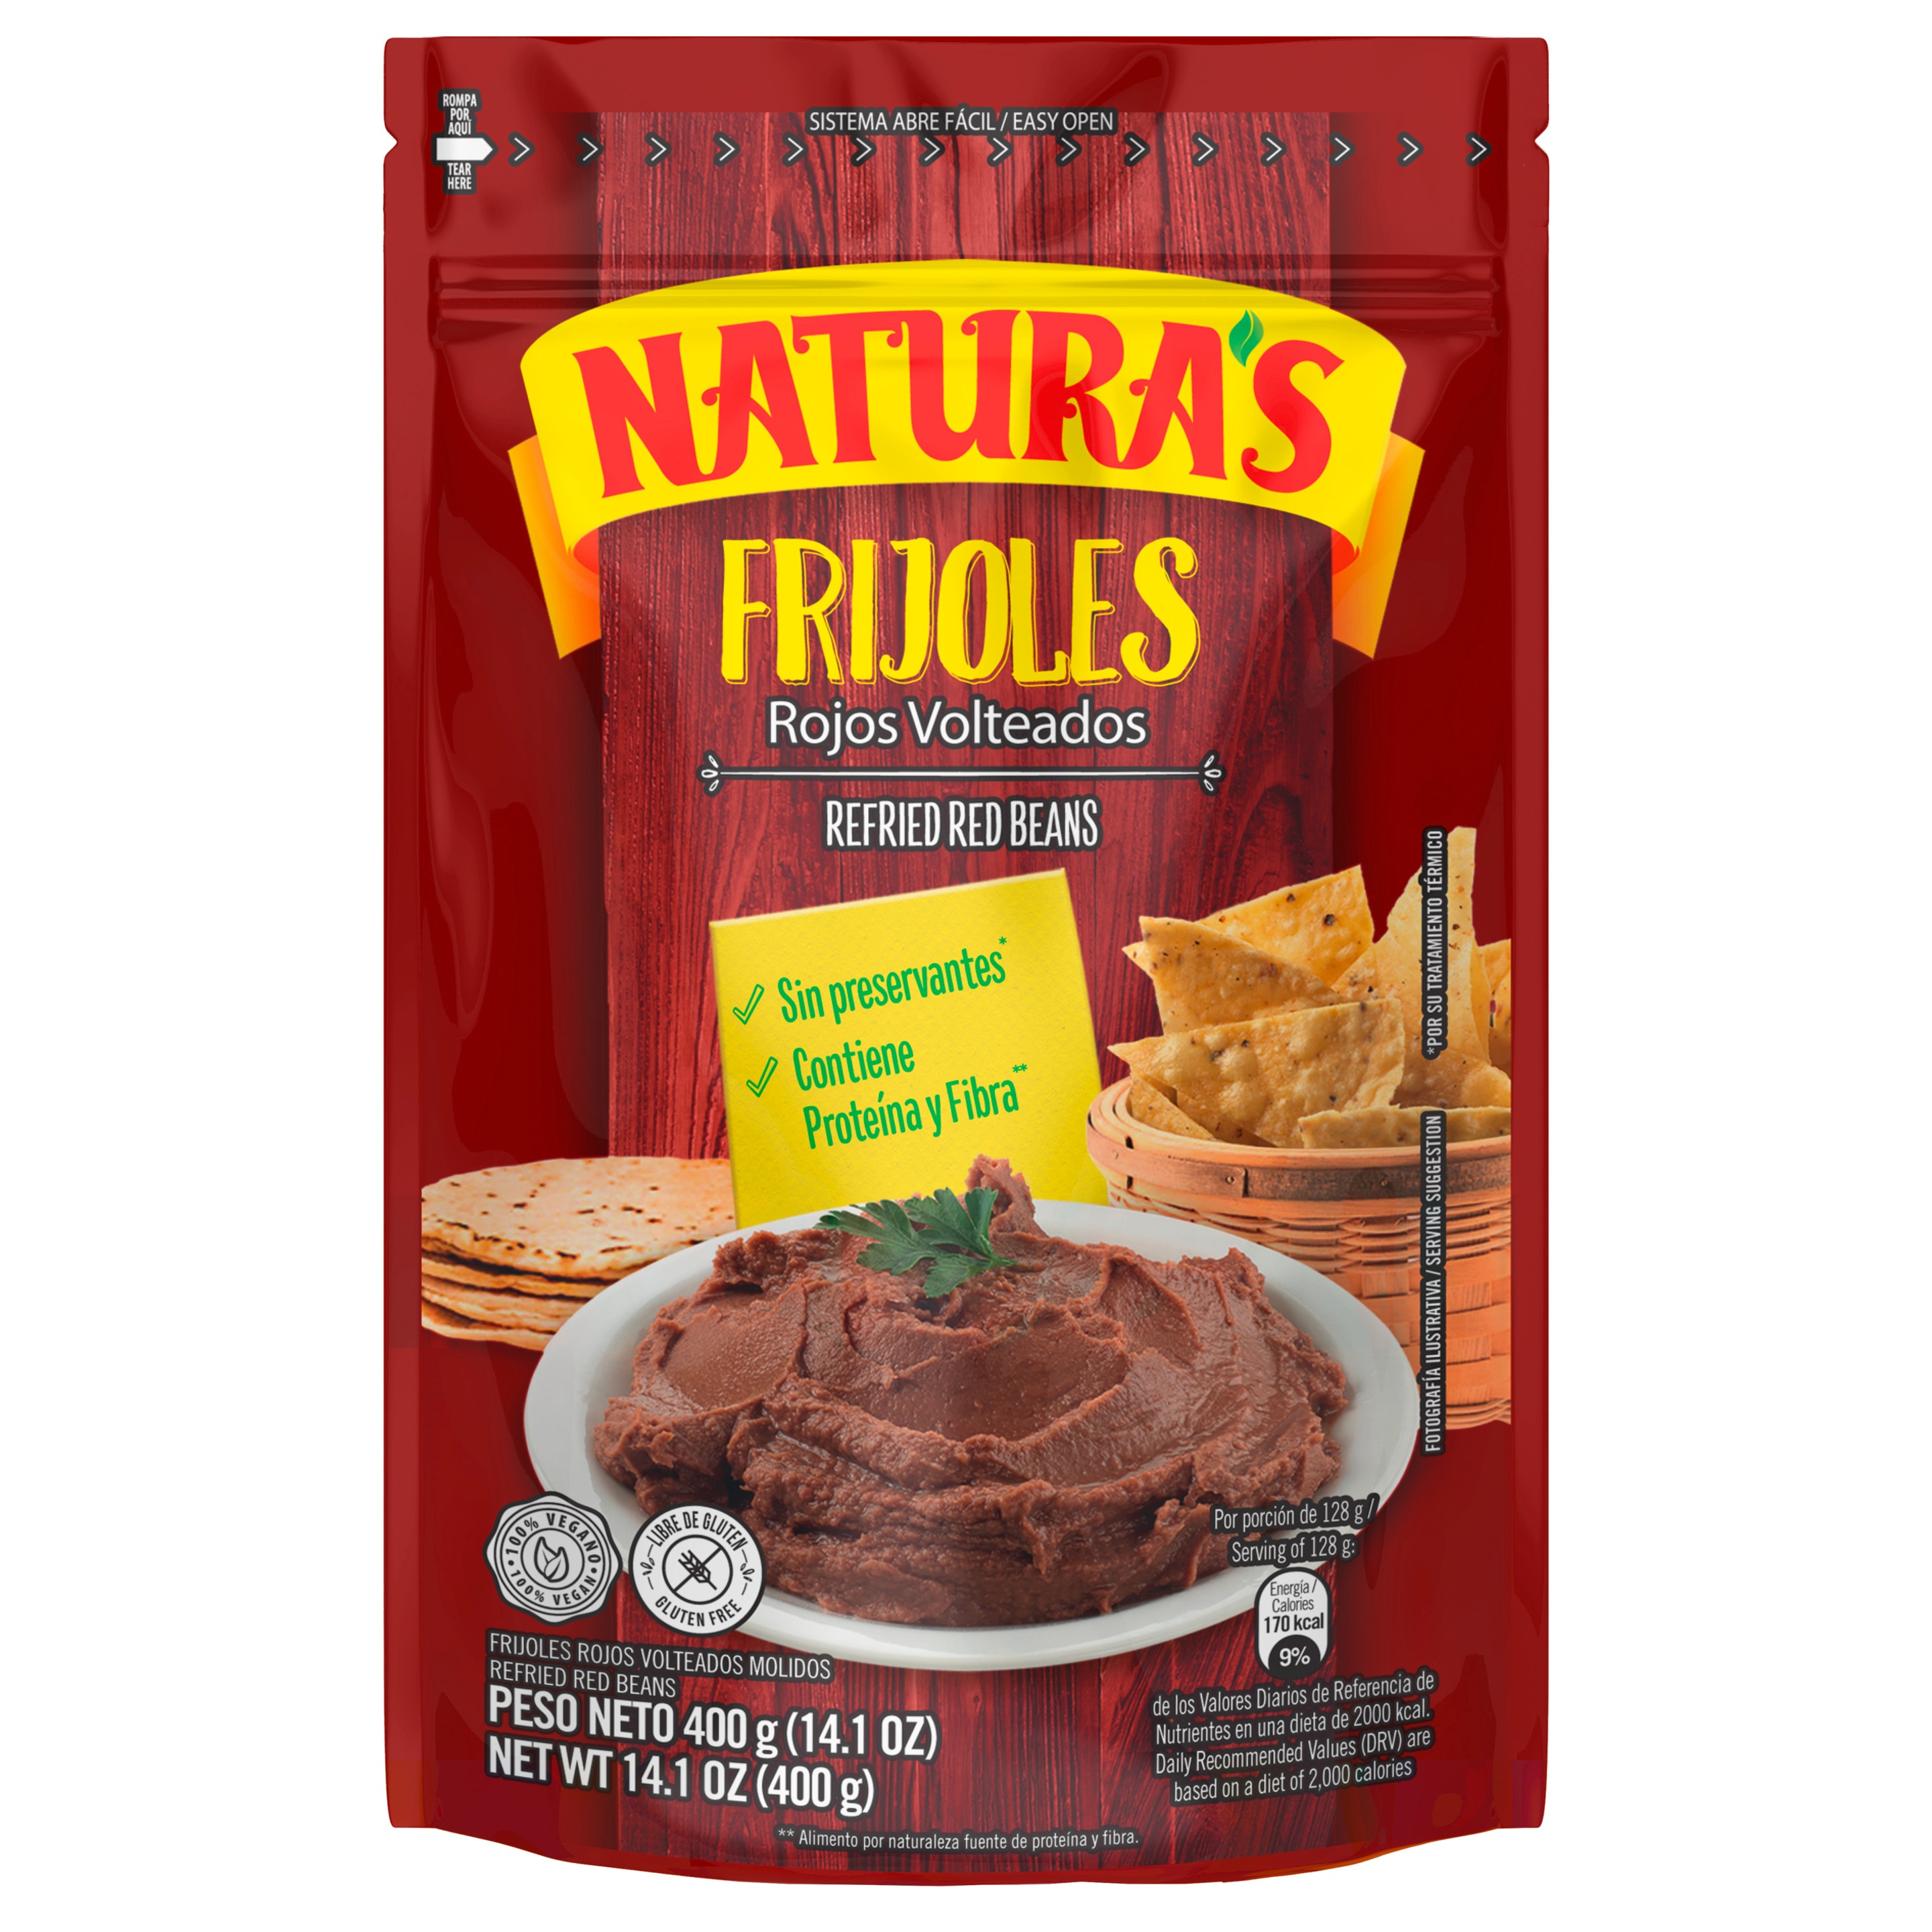 Naturas Frijoles Refried Red Beans